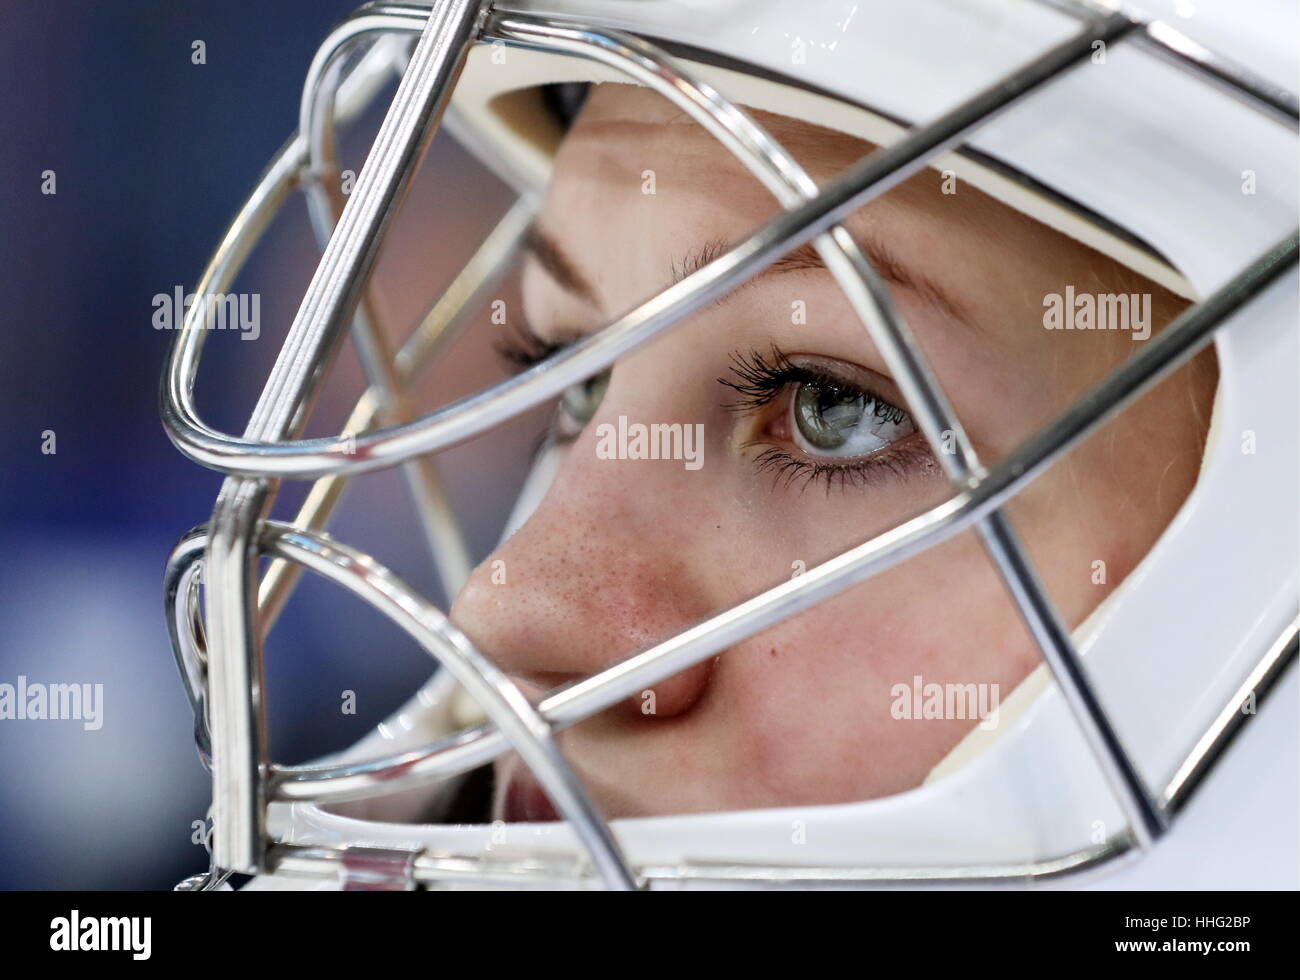 Ufa, Russia. 19th 2017. Vostok's goaltender Nadezhda Morozova in a Russian Women's League (ZhKhL) all-star against Zapad. The event is part of the Ice Hockey All Star Week organised